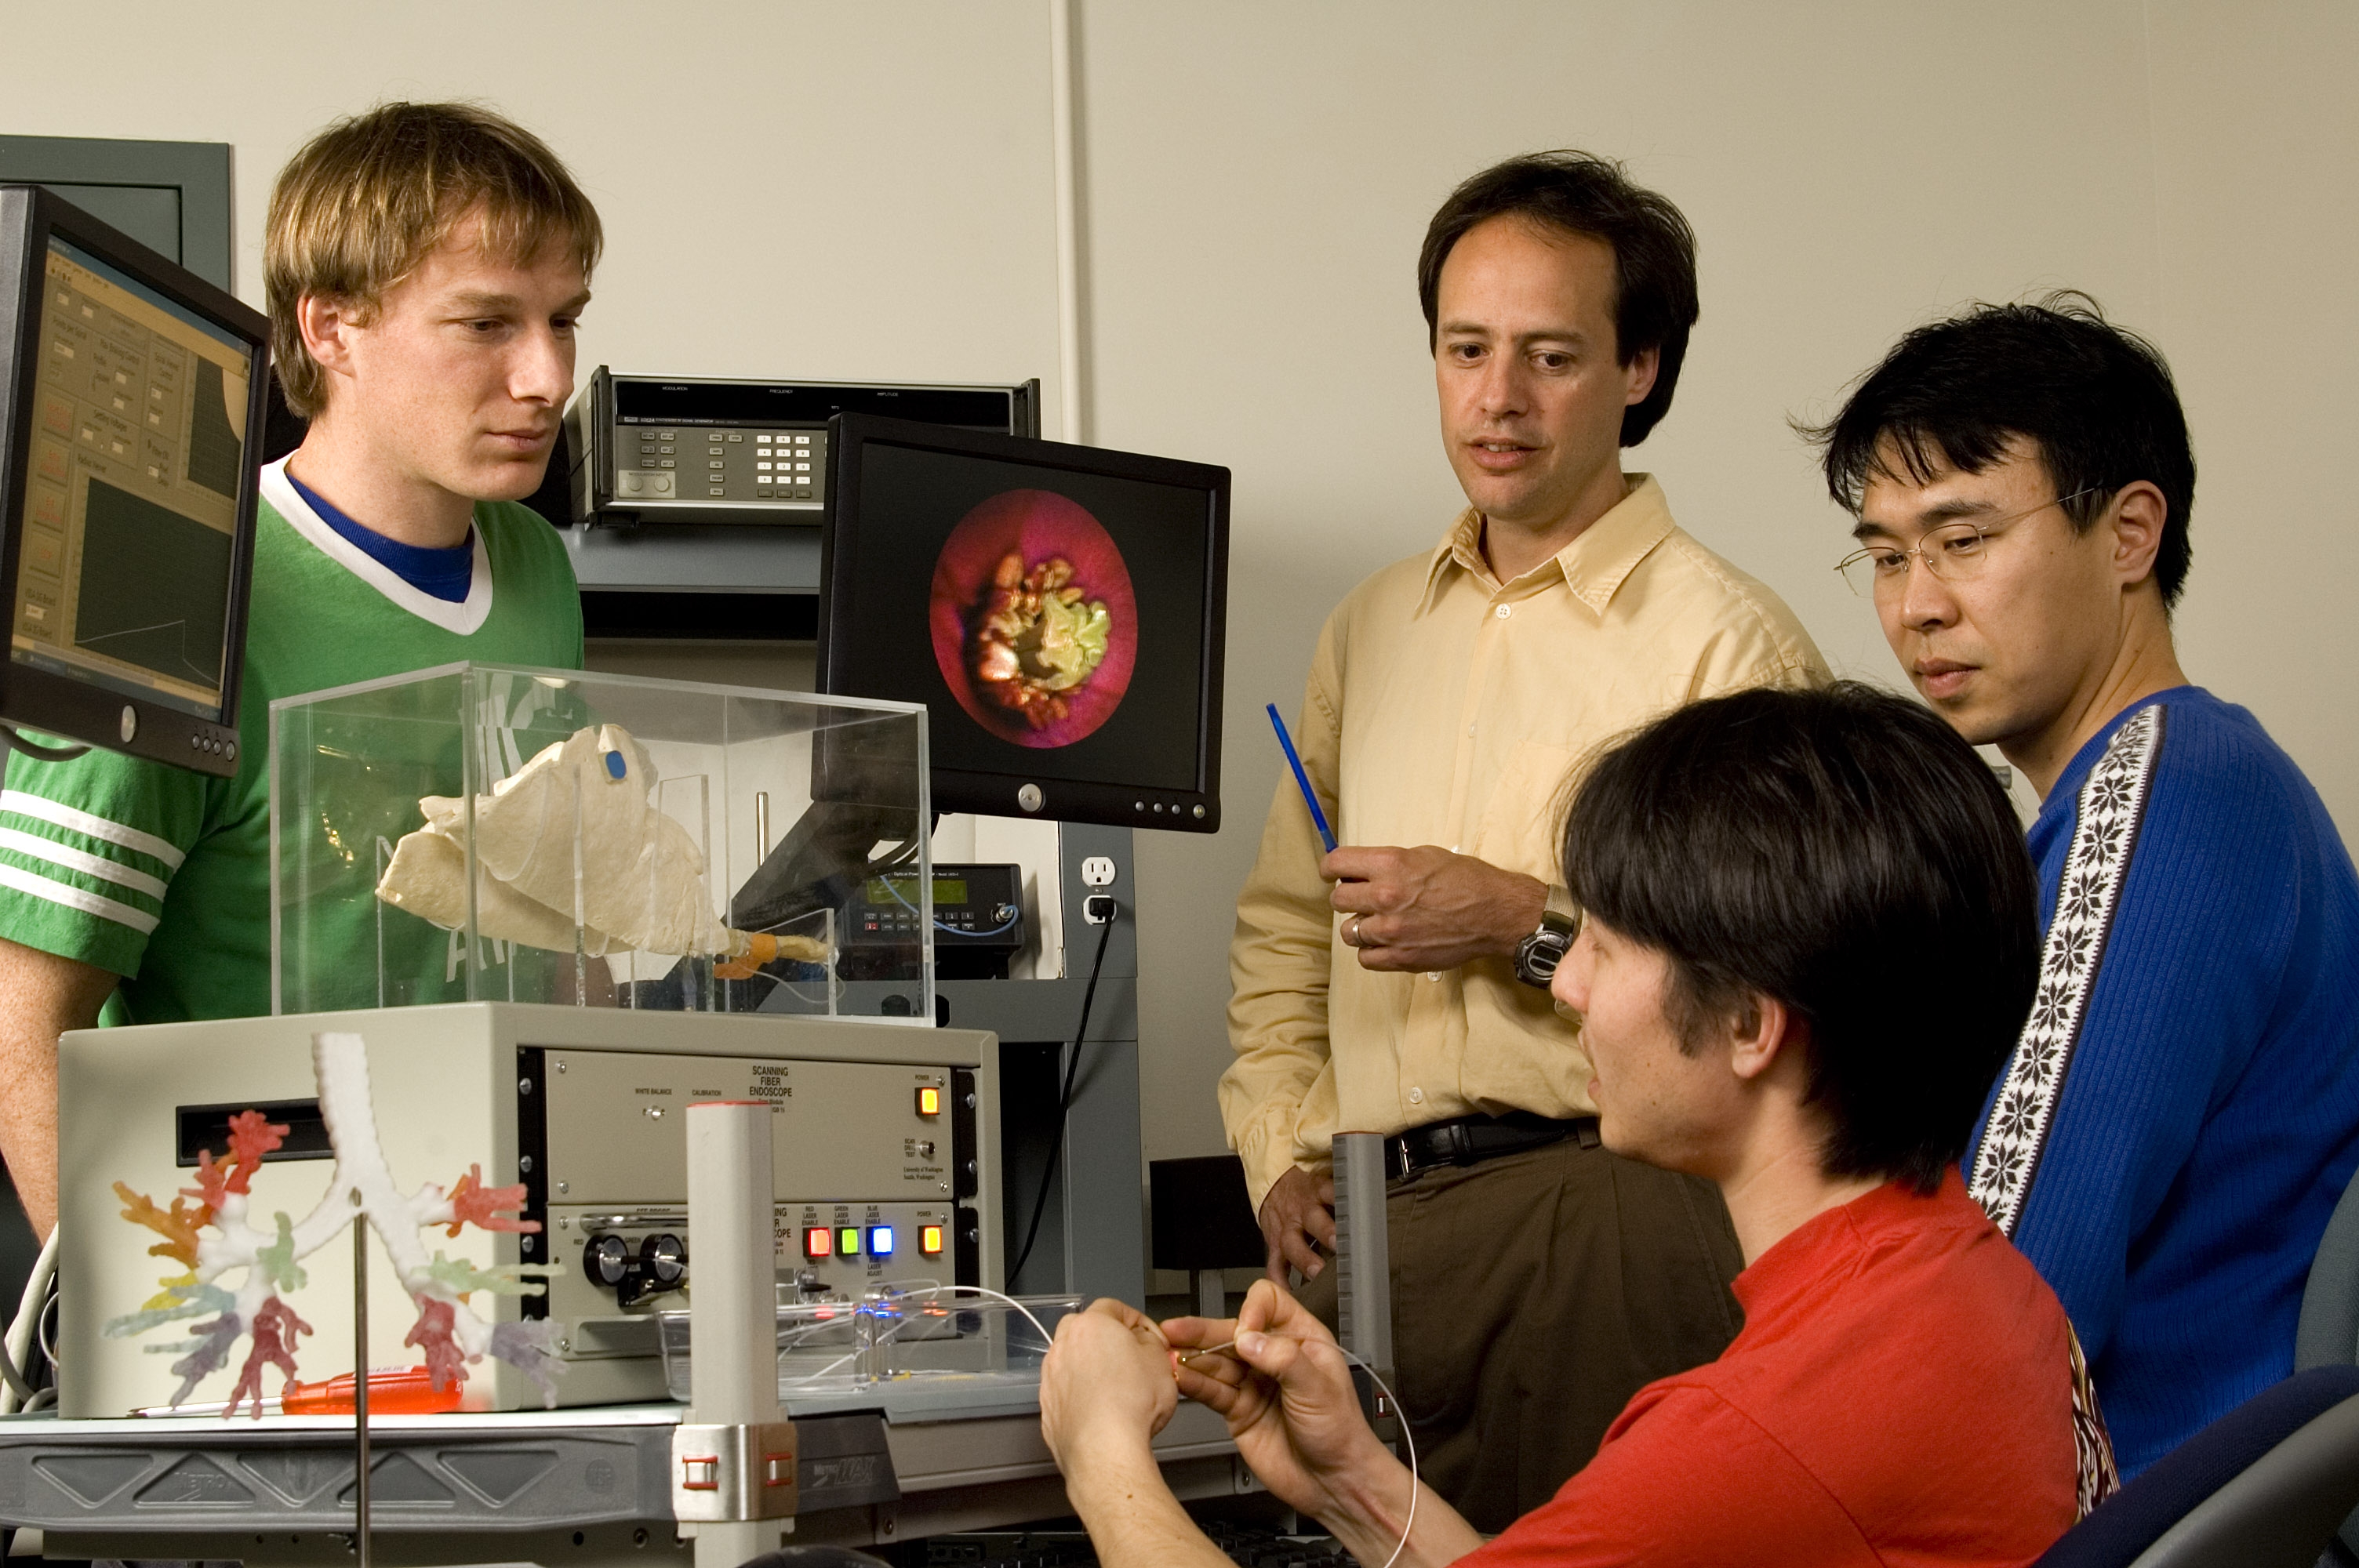 Engineering faculty member and three students in a lab setting